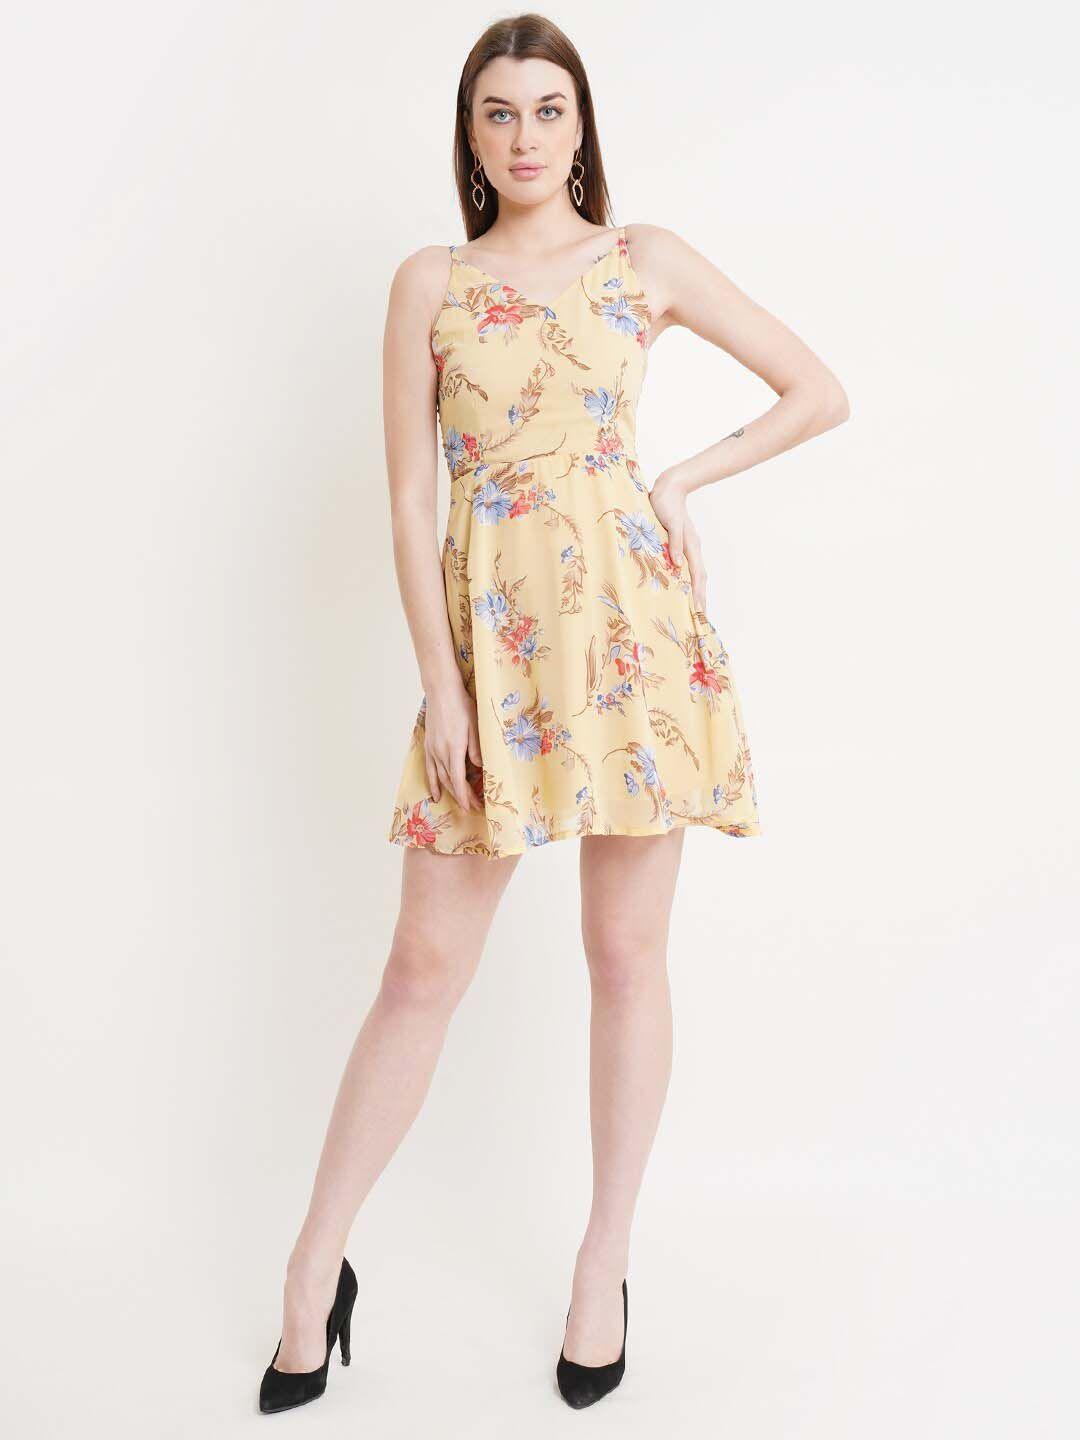 dodo-&-moa-yellow-&-red-floral-sheath-dress